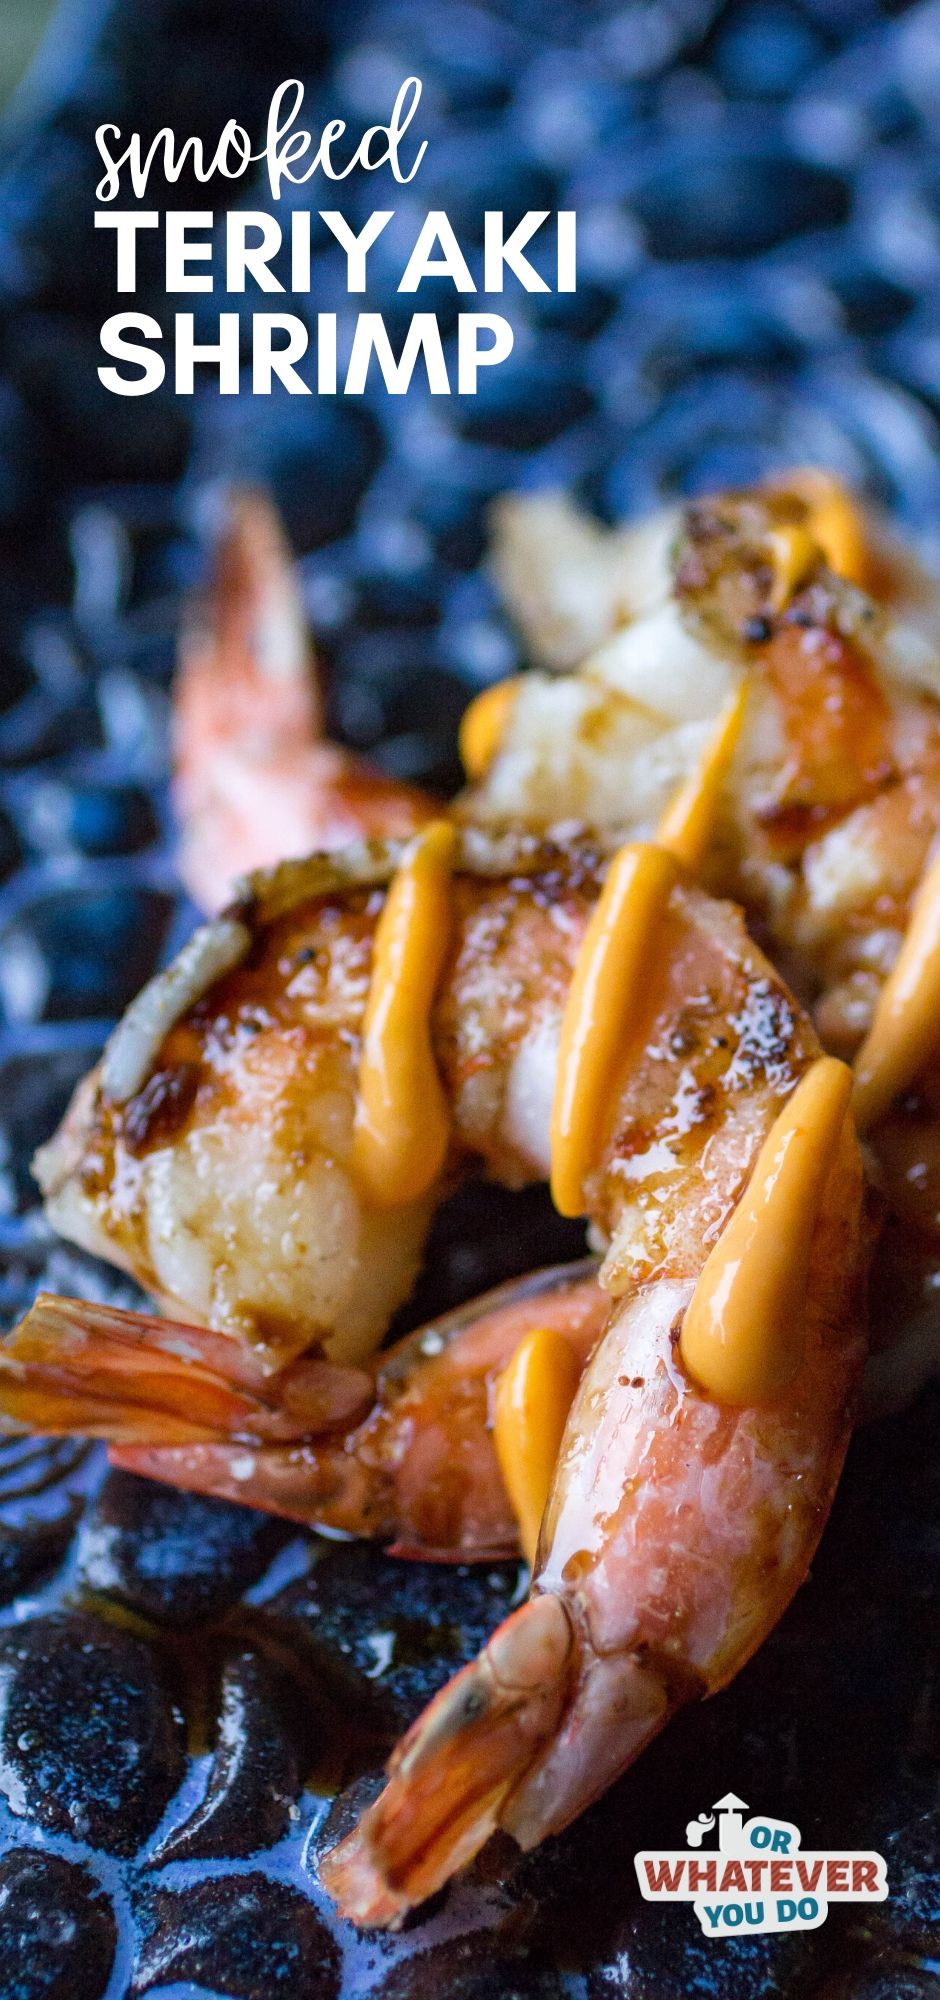 Traeger Smoked Shrimp with Teriyaki | Easy, delicious grilling recipe!